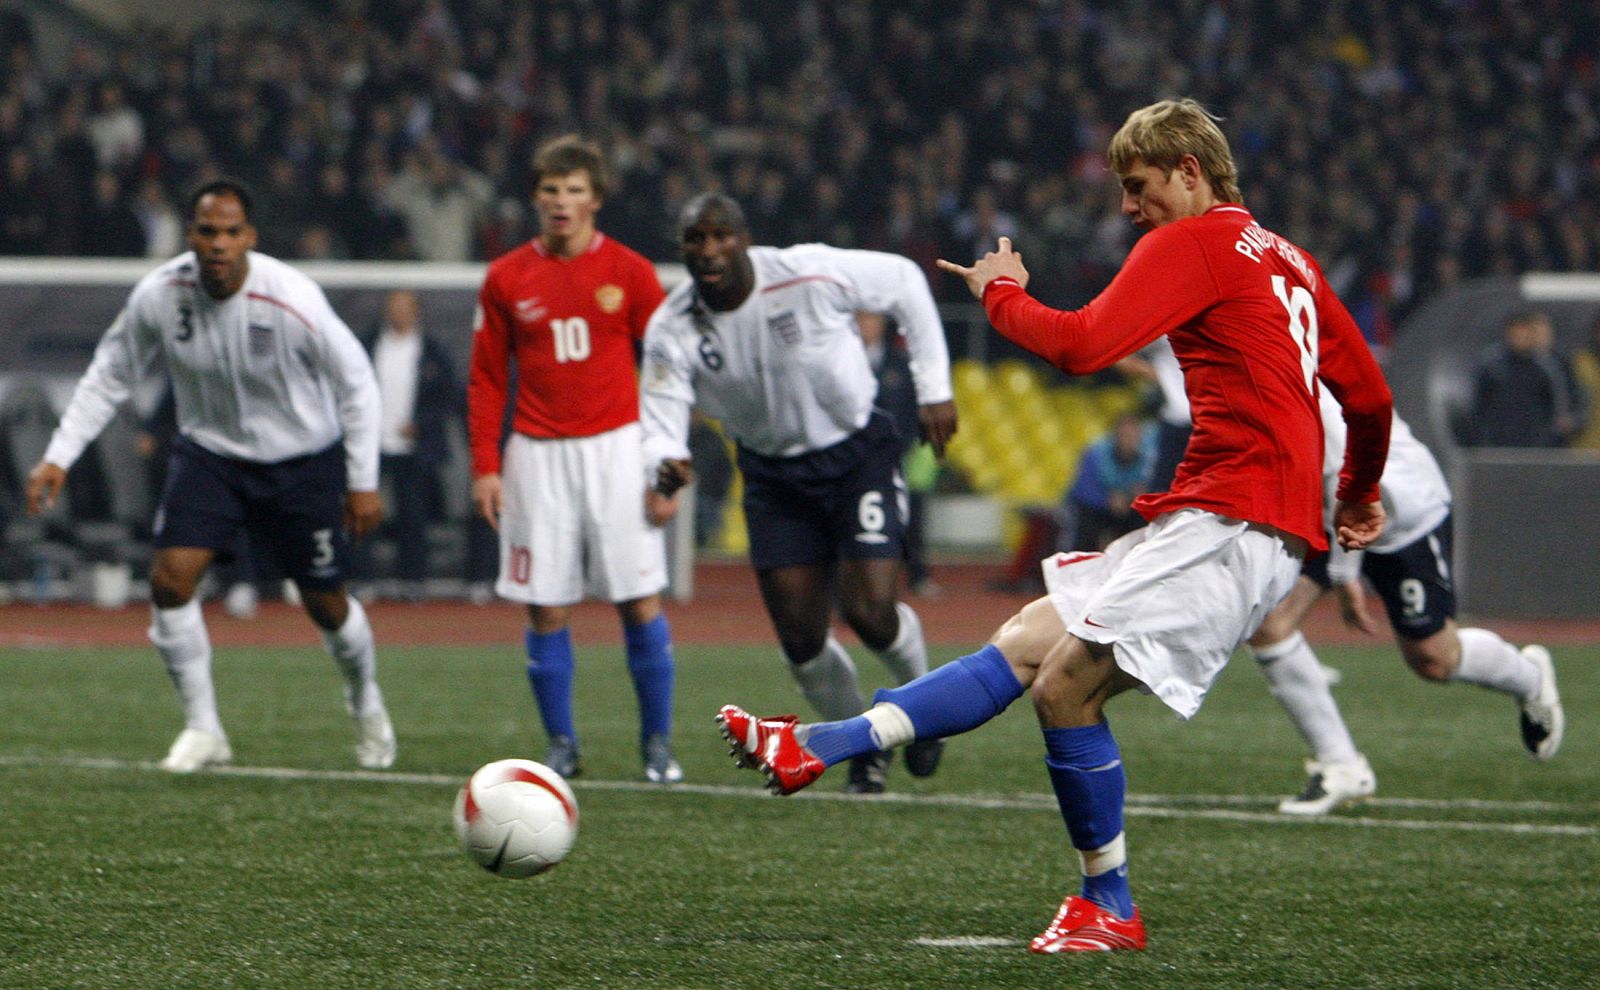 Russia's Pavlyuchenko scores a penalty against England during their Euro 2008 qualifying match in Moscow